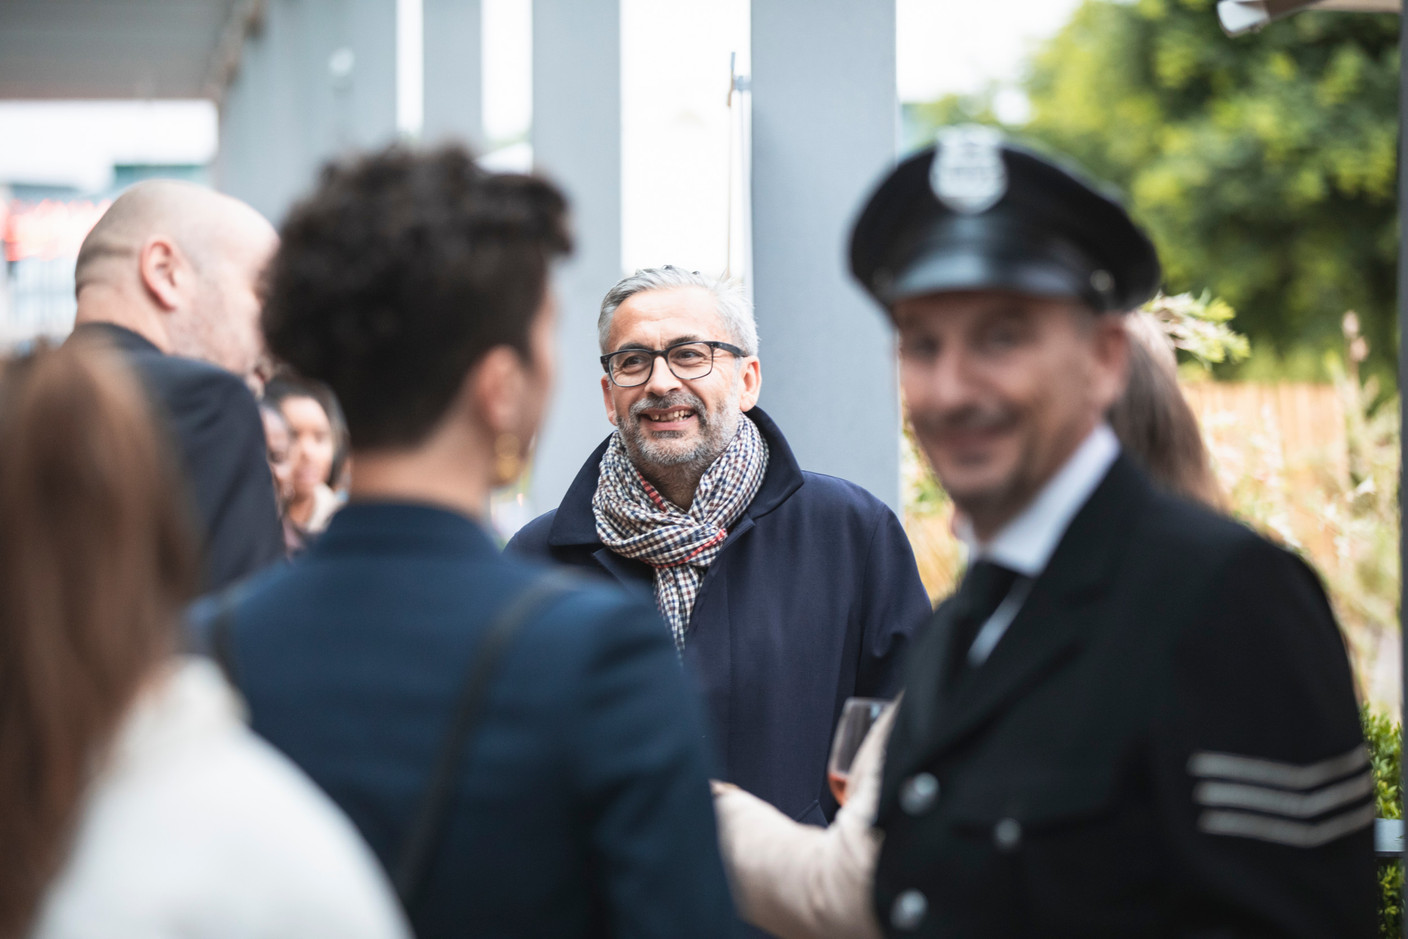 Mike Koedinger, founder and chairman of Maison Moderne, the company that publishes Delano, is seen during Delano’s 10th anniversary party, 13 July 2021. Simon Verjus/Maison Moderne